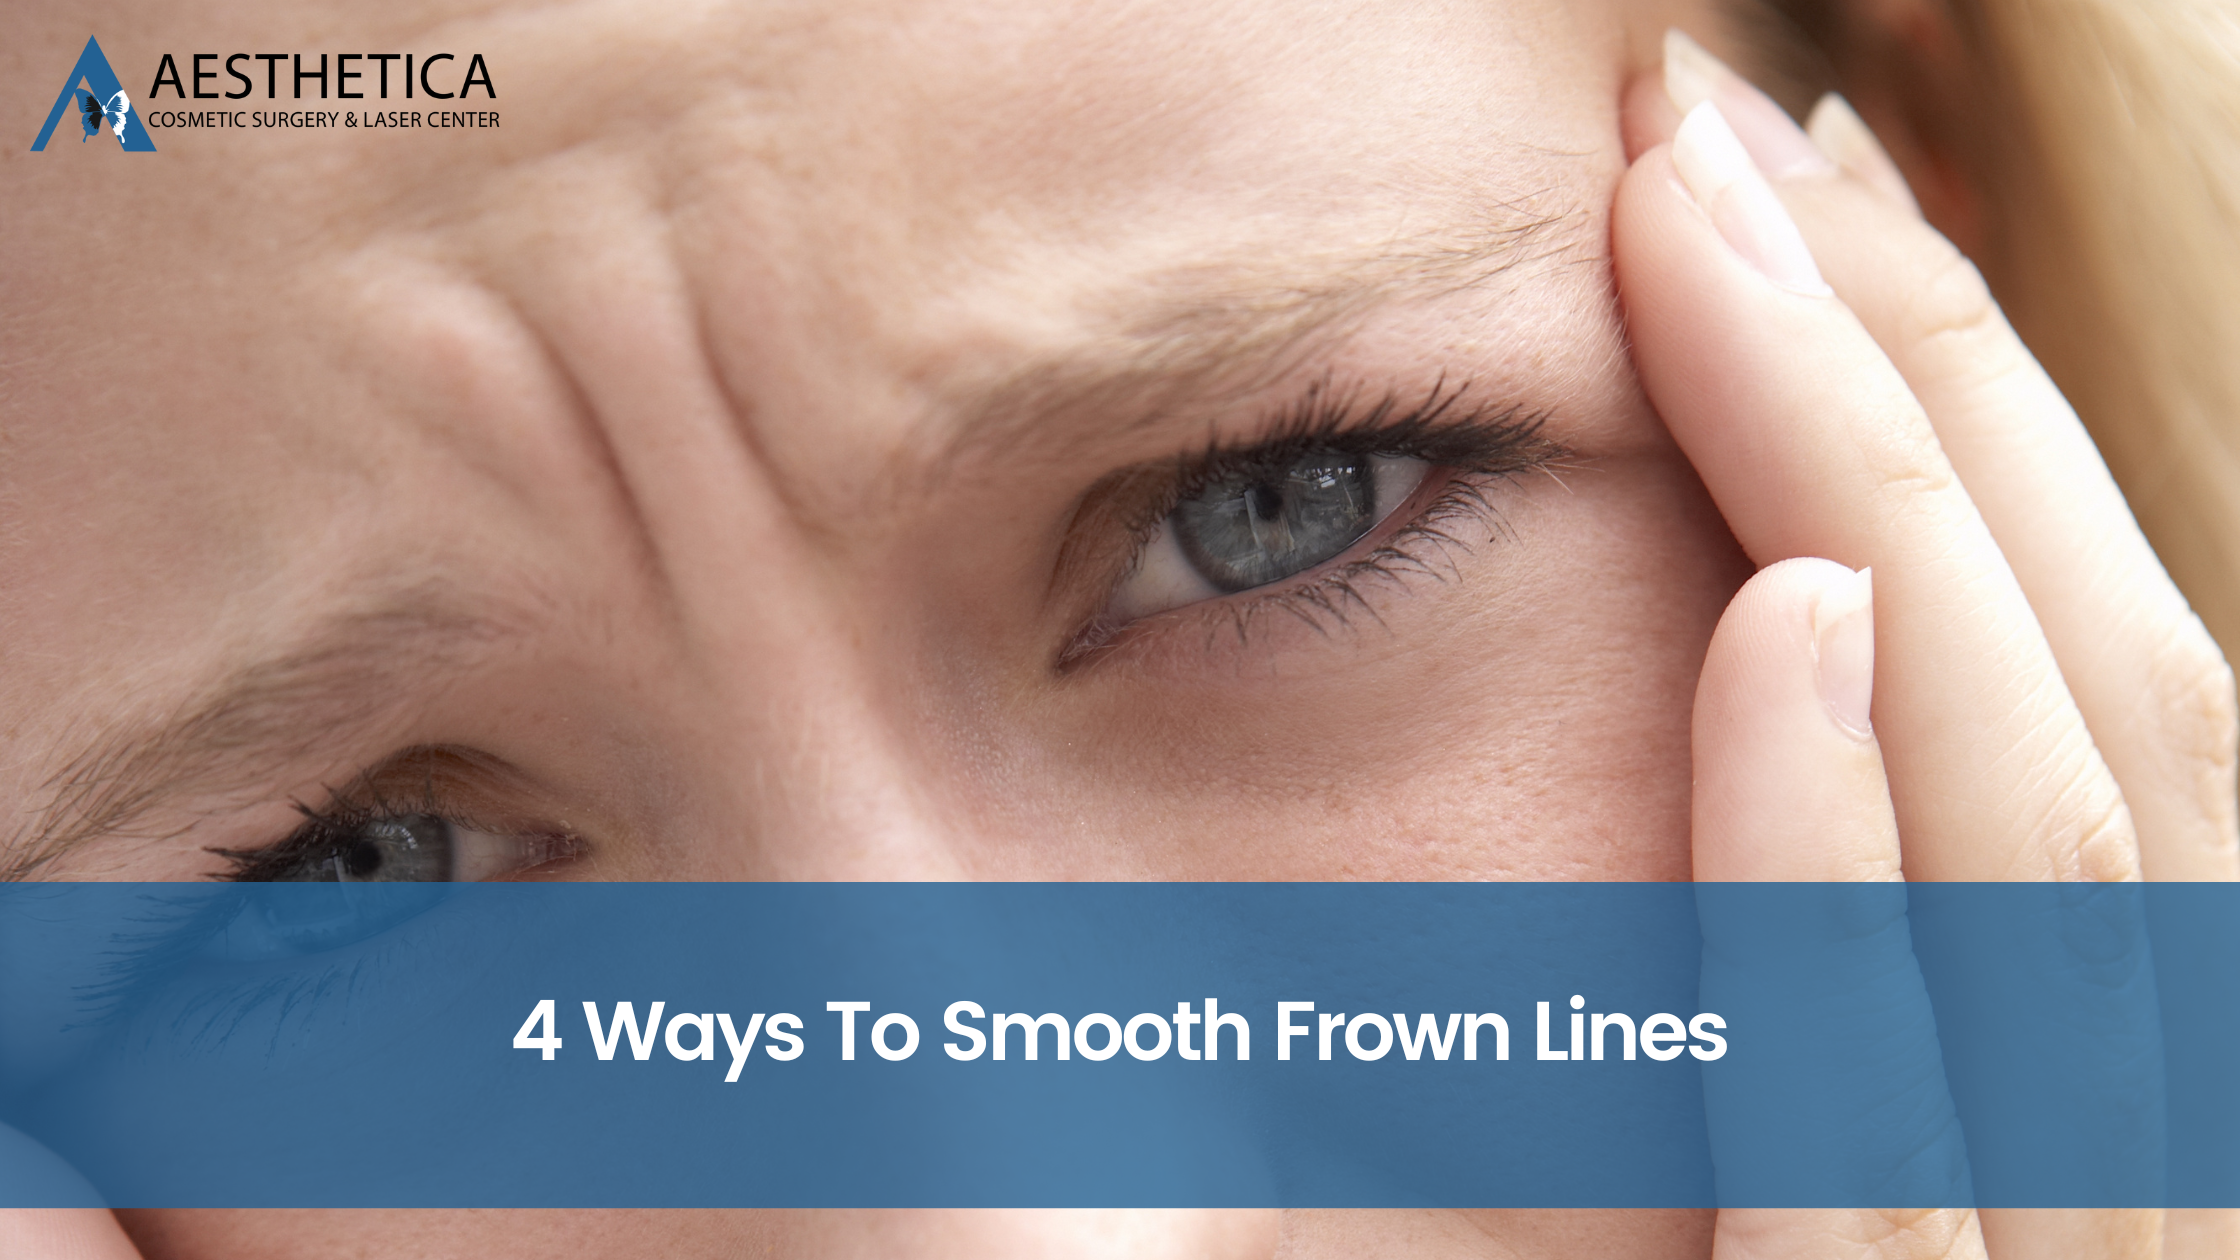 4 Ideal Ways to Smooth Your Frown Lines